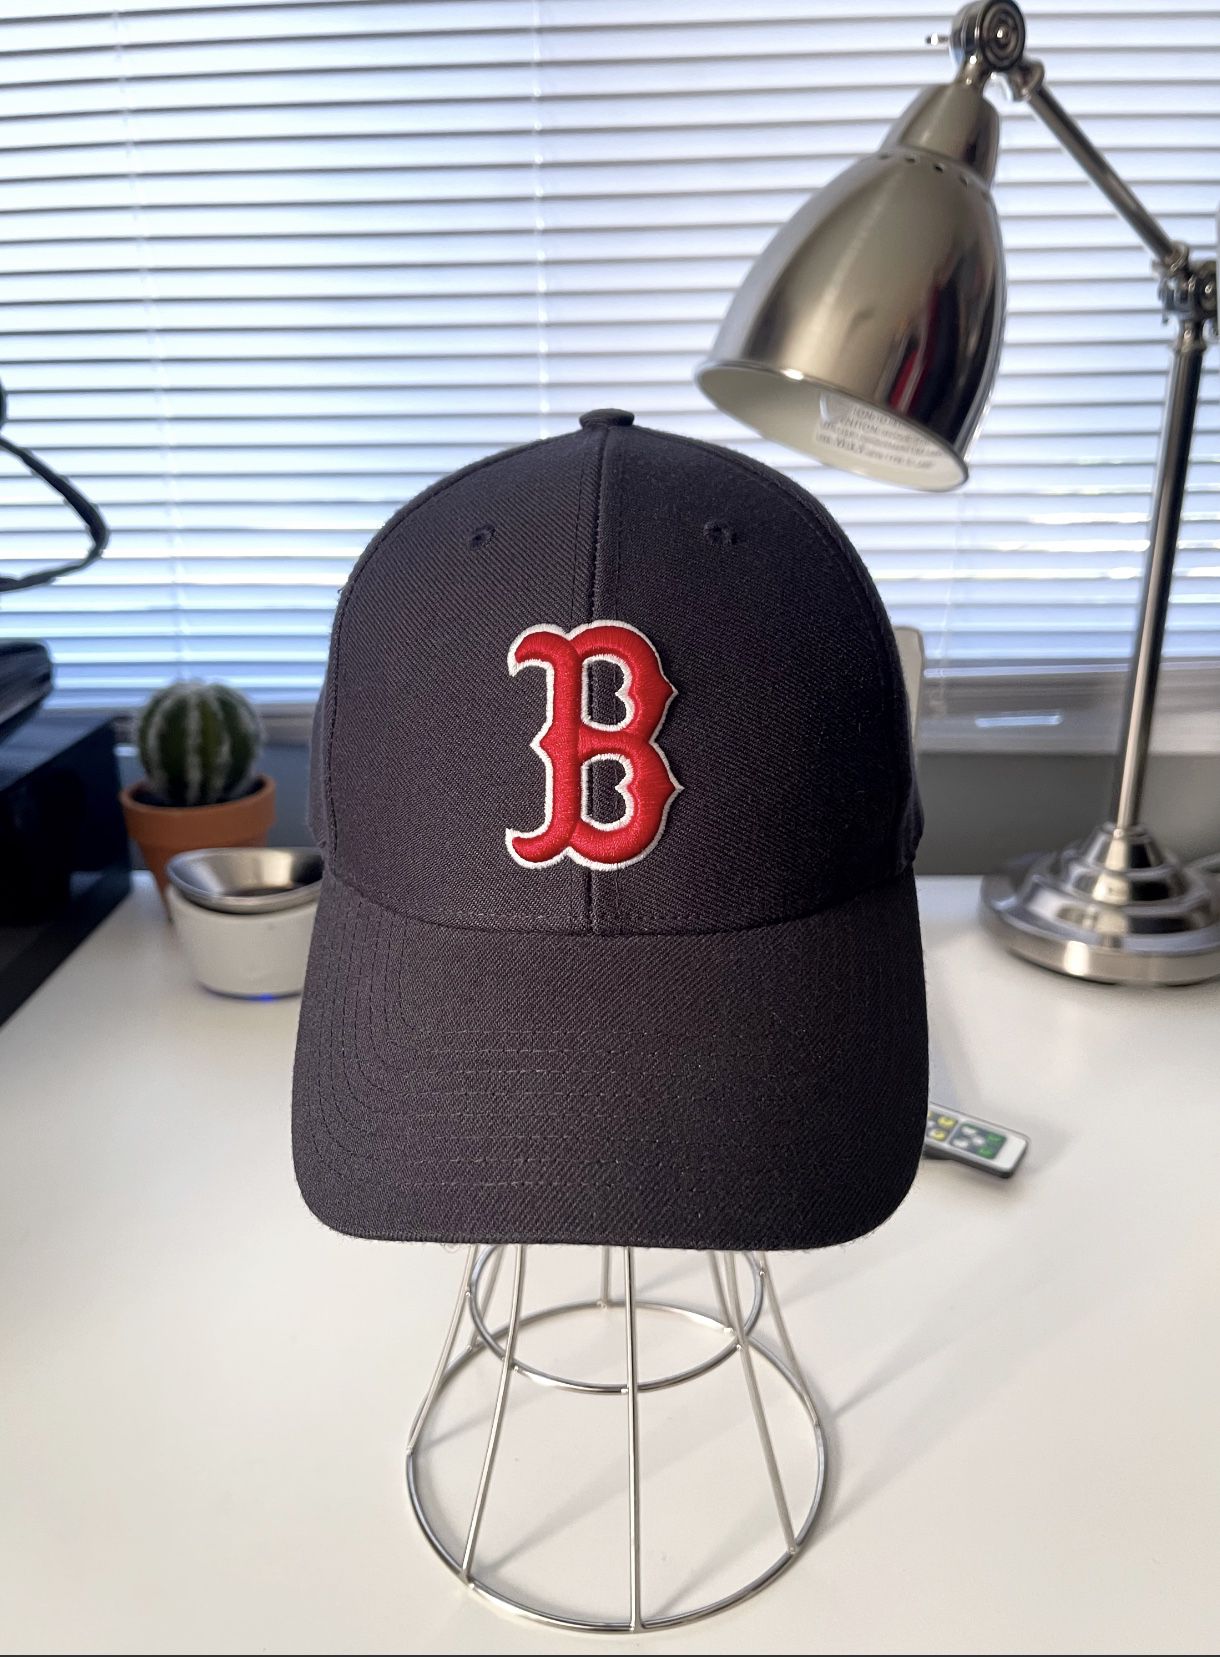 Mens Vintage Boston Red Sox SnapBack hat Excellent condition! No issues Navy blue Adjustable Cap Hat